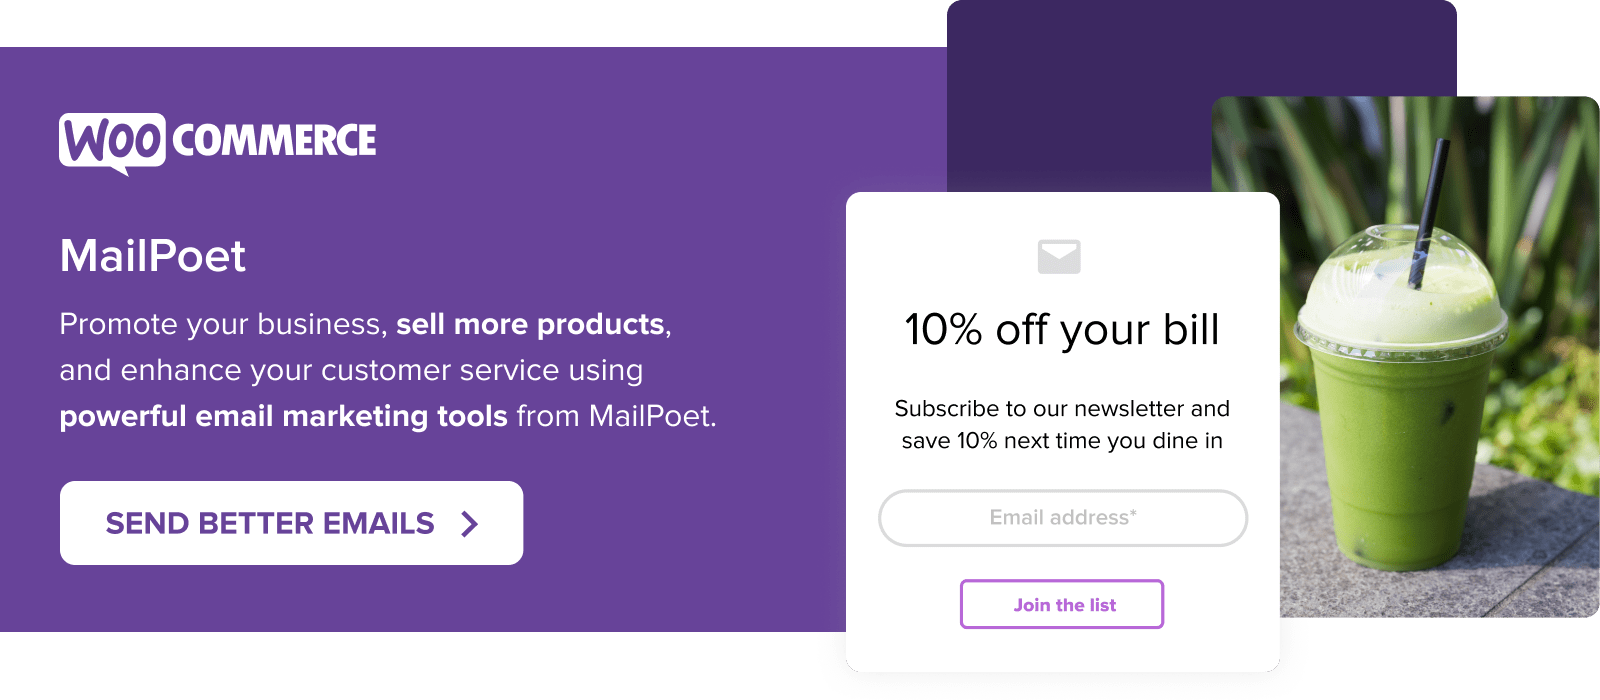 Promote your business and sell more products with email marketing tools from MailPoet